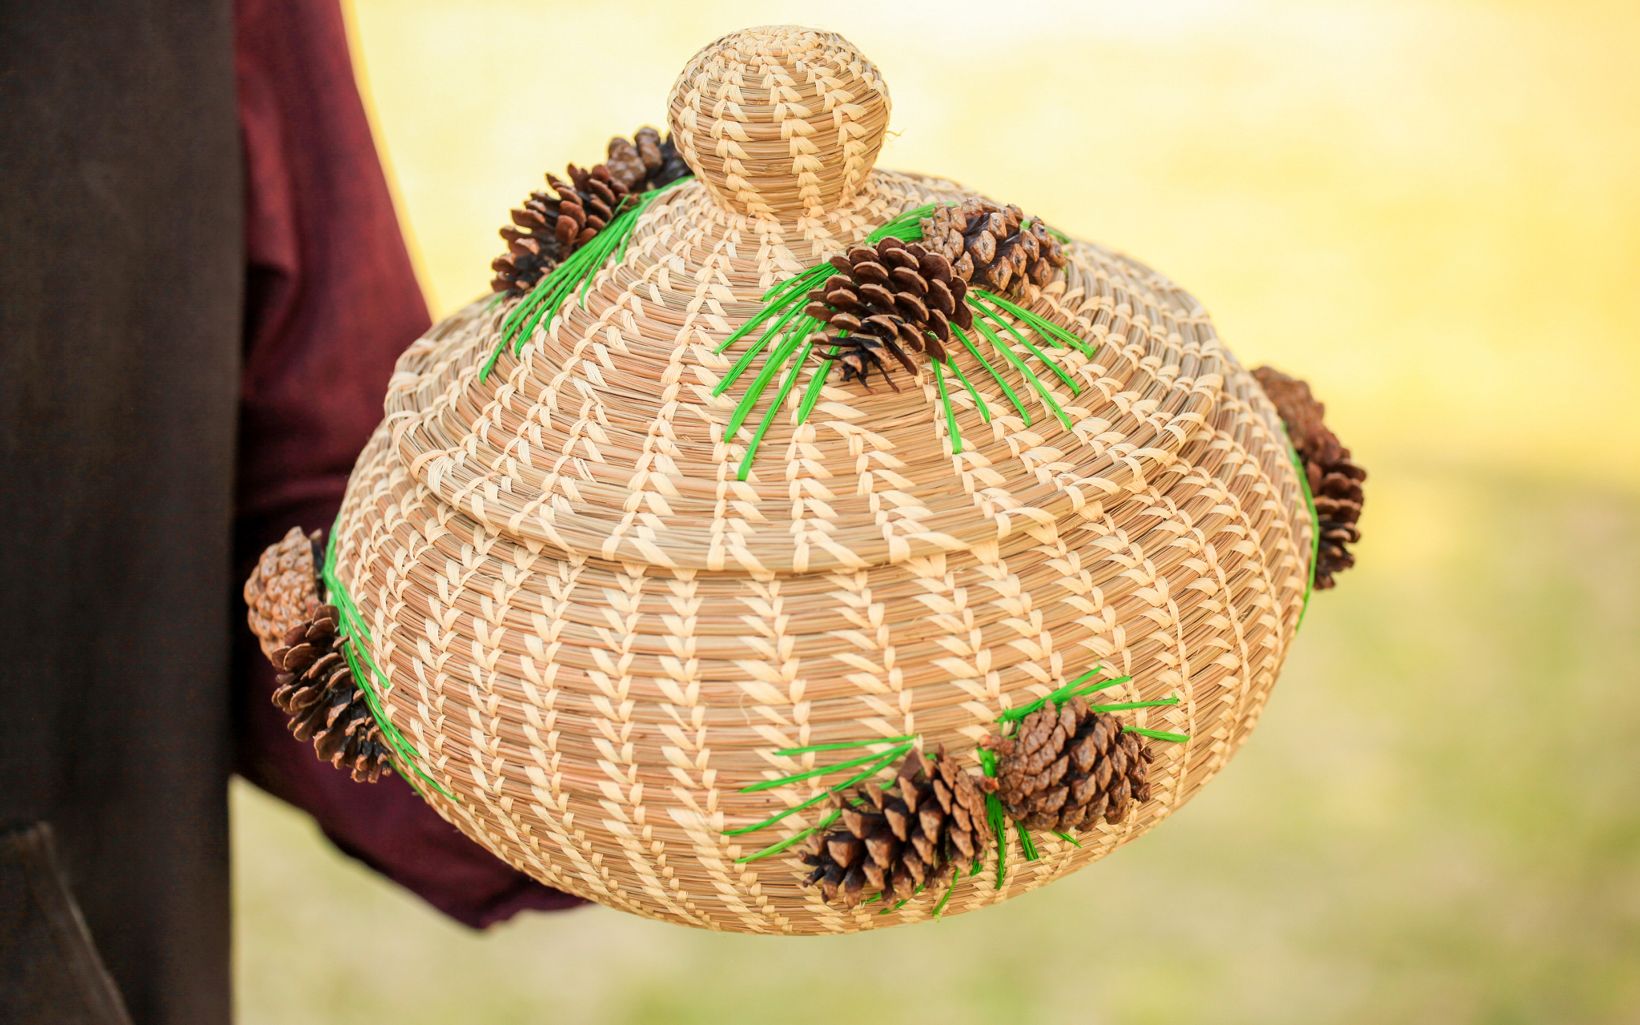 A close-up of one of Elliott Abbey's baskets, which has an off white and tan geometric pattern and is decorated with small pinecones and bright green raffia yarn. 